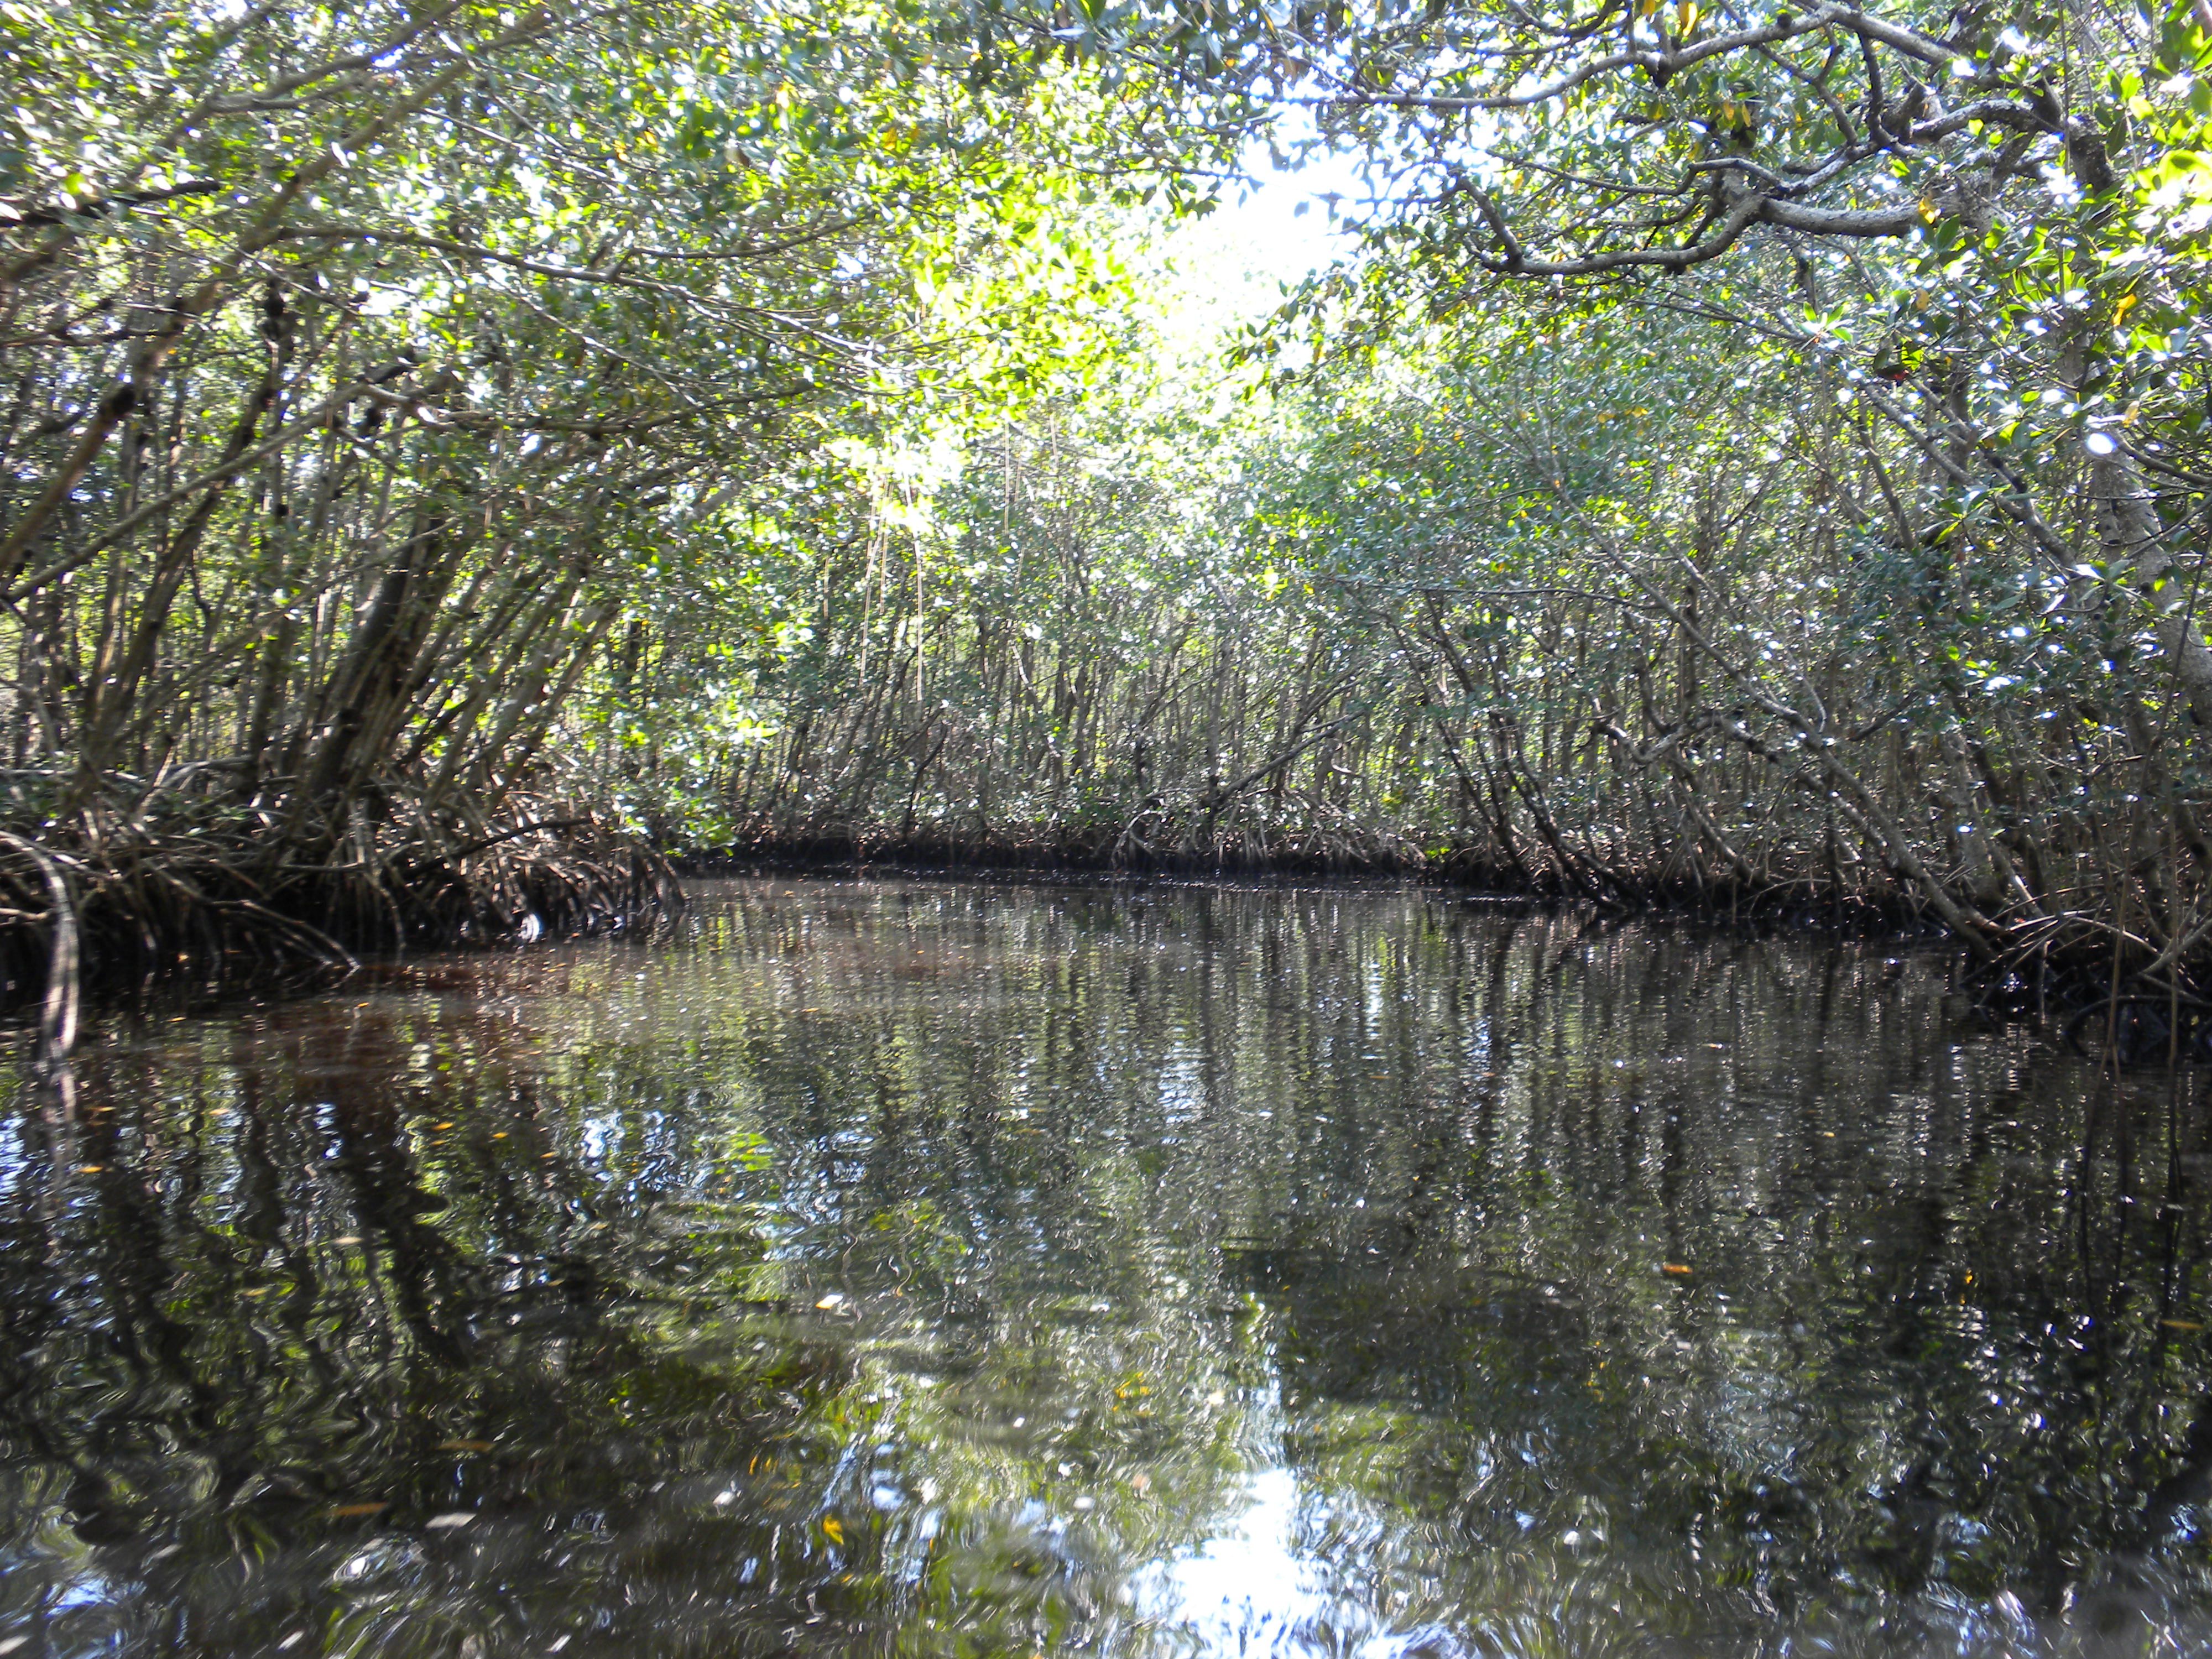 A lane of open water cuts through a forest of red mangrove in south Florida.